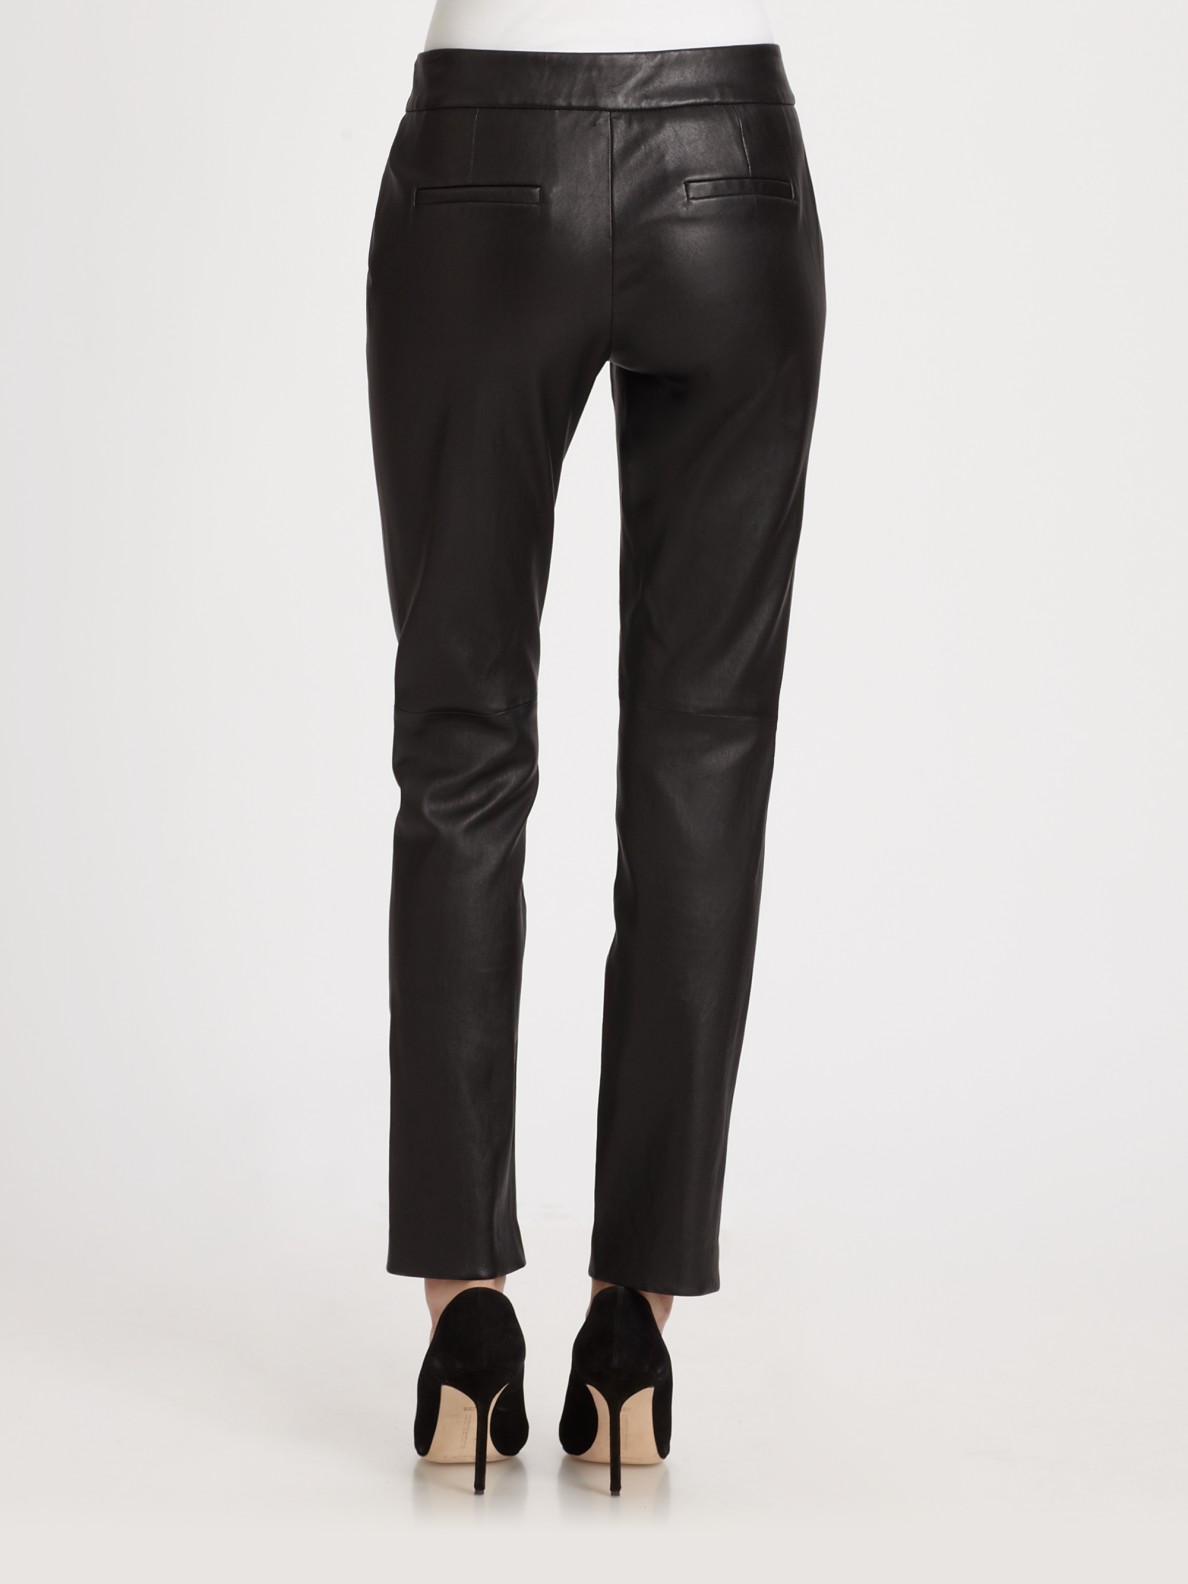 Milly Cropped Leather Pants in Black | Lyst